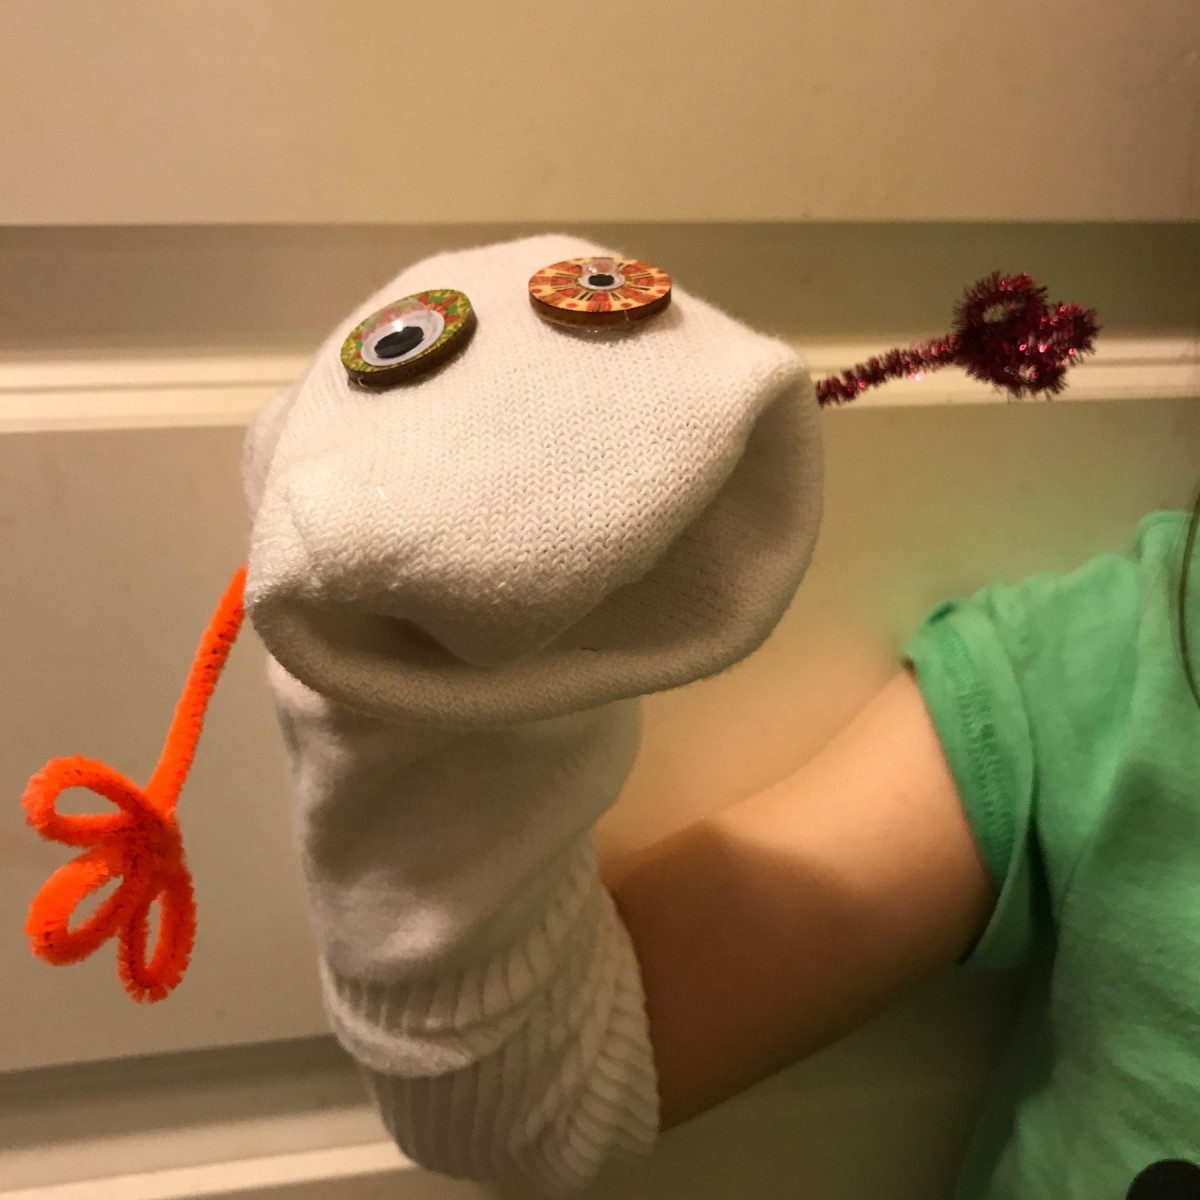 Making Simple Sock Puppets | ThriftyFun